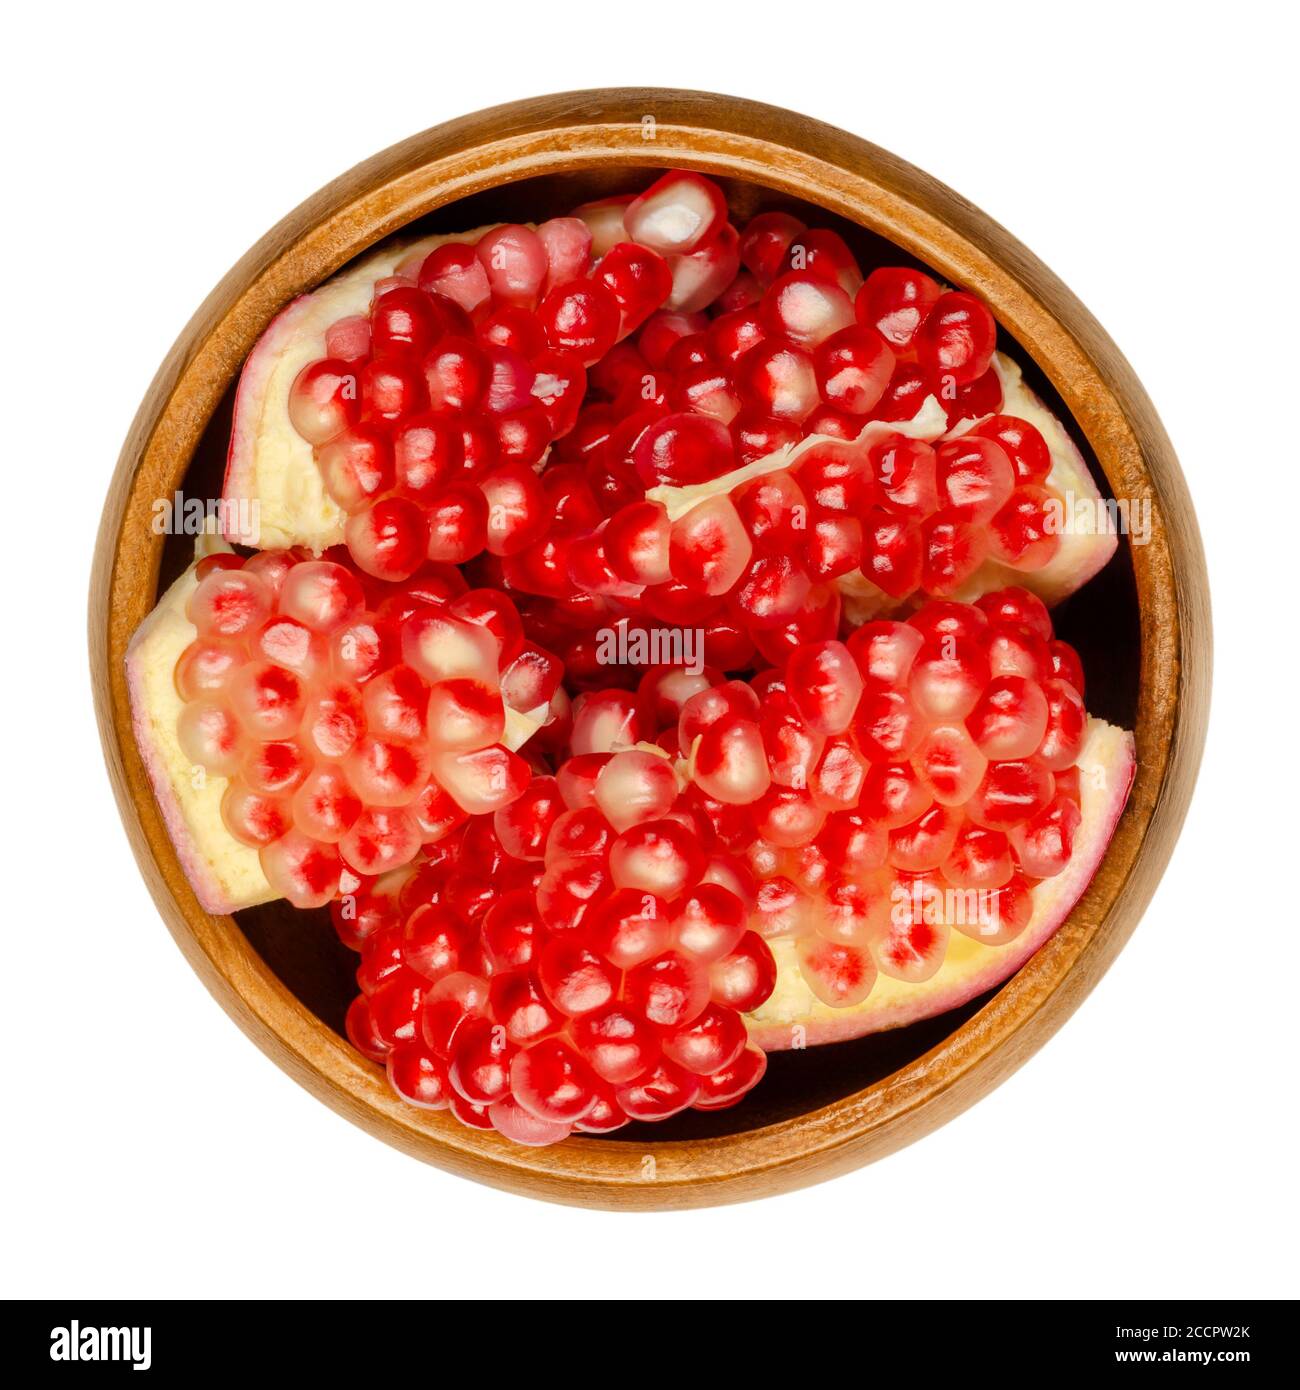 Pomegranate clusters in a wooden bowl. Punica granatum. Fruit with red to purple seed clusters. Can be eaten fresh, juiced, or used to make grandine. Stock Photo